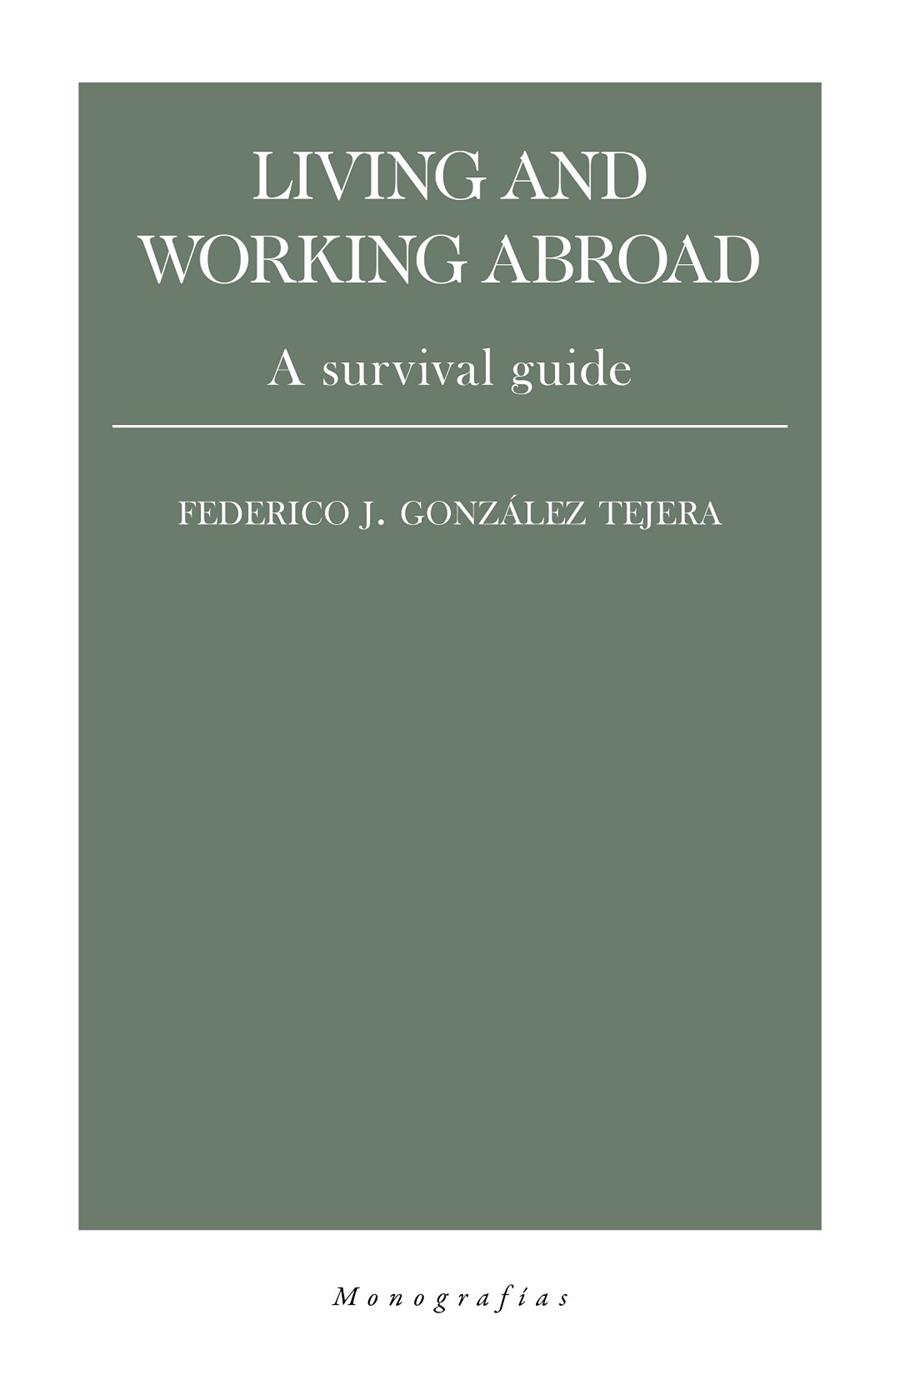 LIVING AND WORKING ABROAD | 9788418236013 | GONZALEZ TEJERA, FEDERICO J.